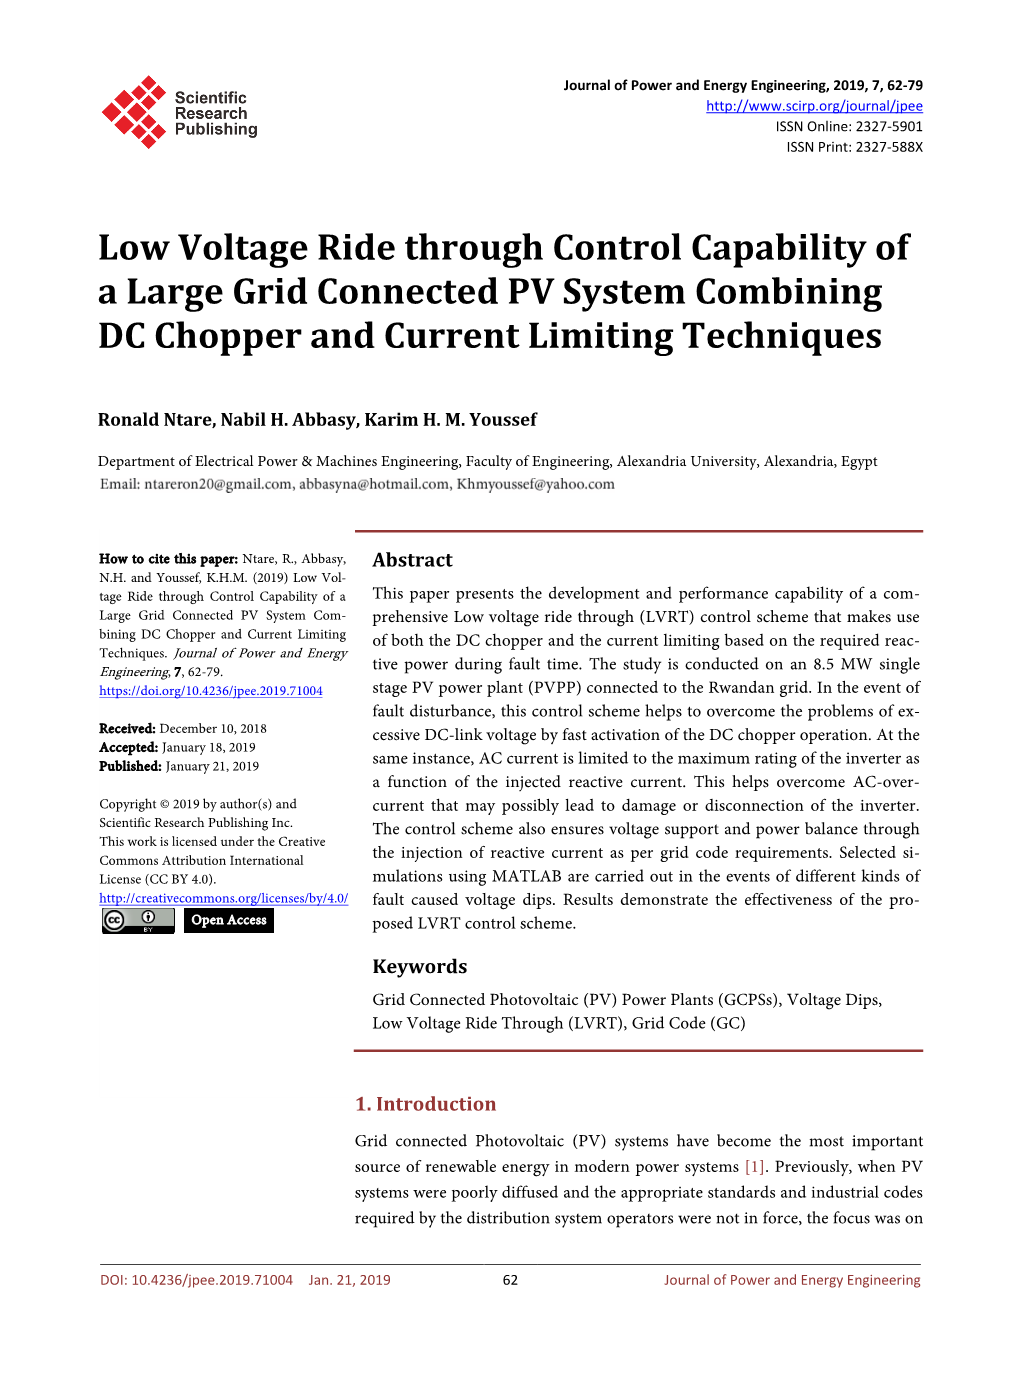 Low Voltage Ride Through Control Capability of a Large Grid Connected PV System Combining DC Chopper and Current Limiting Techniques